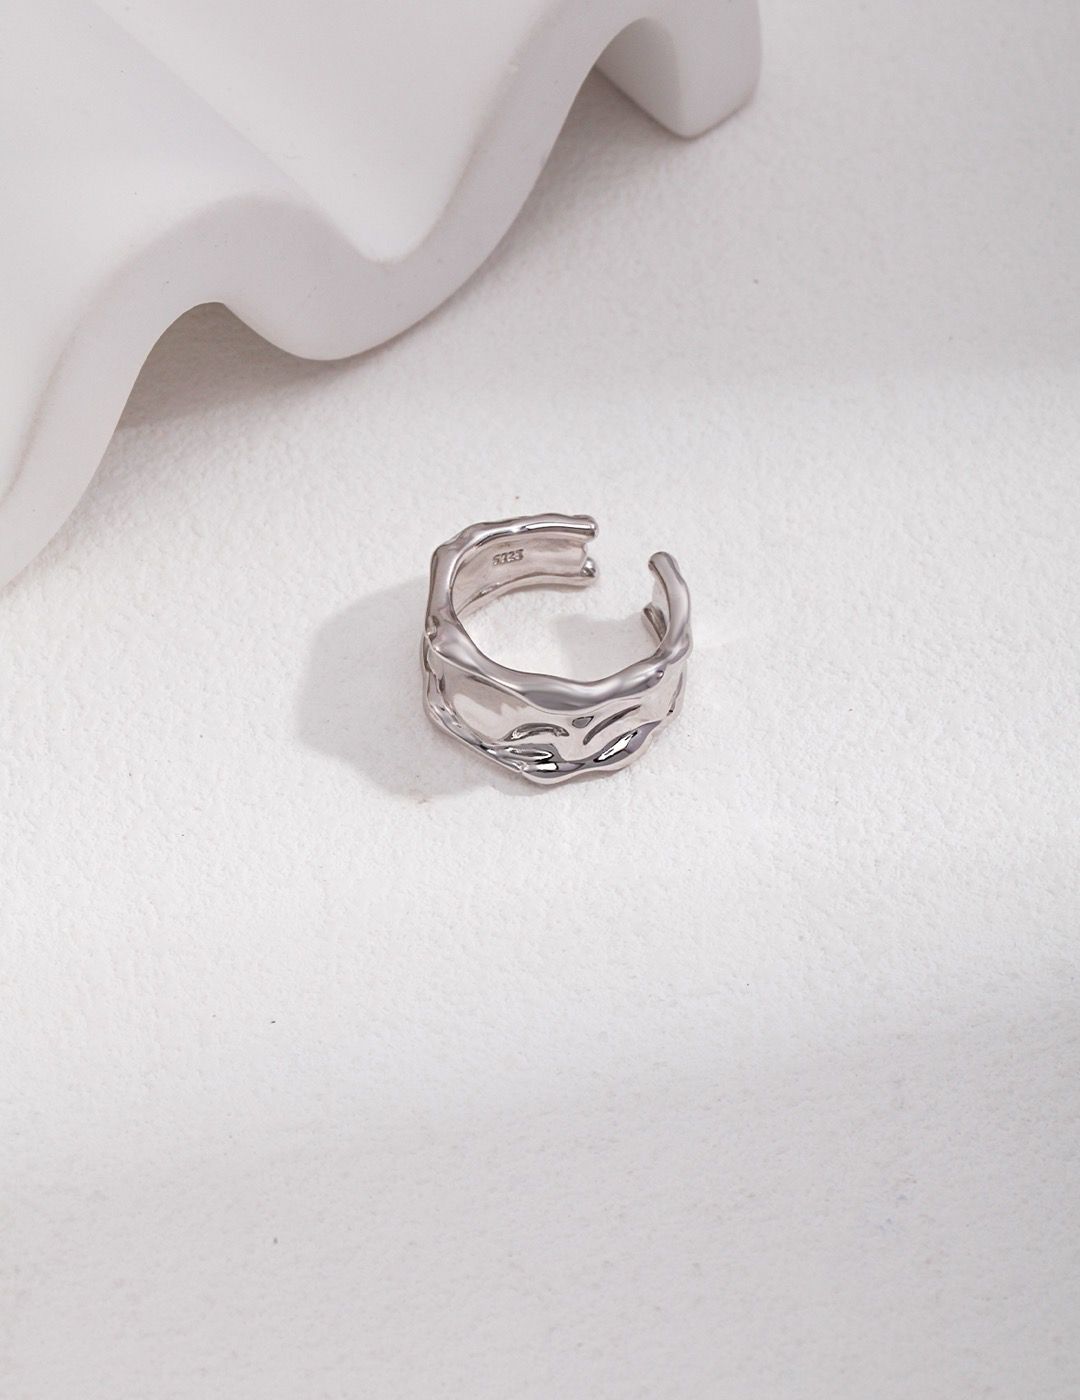 Minimalist Chunky Bands - Sleek, contemporary rings in various sizes and finishes.